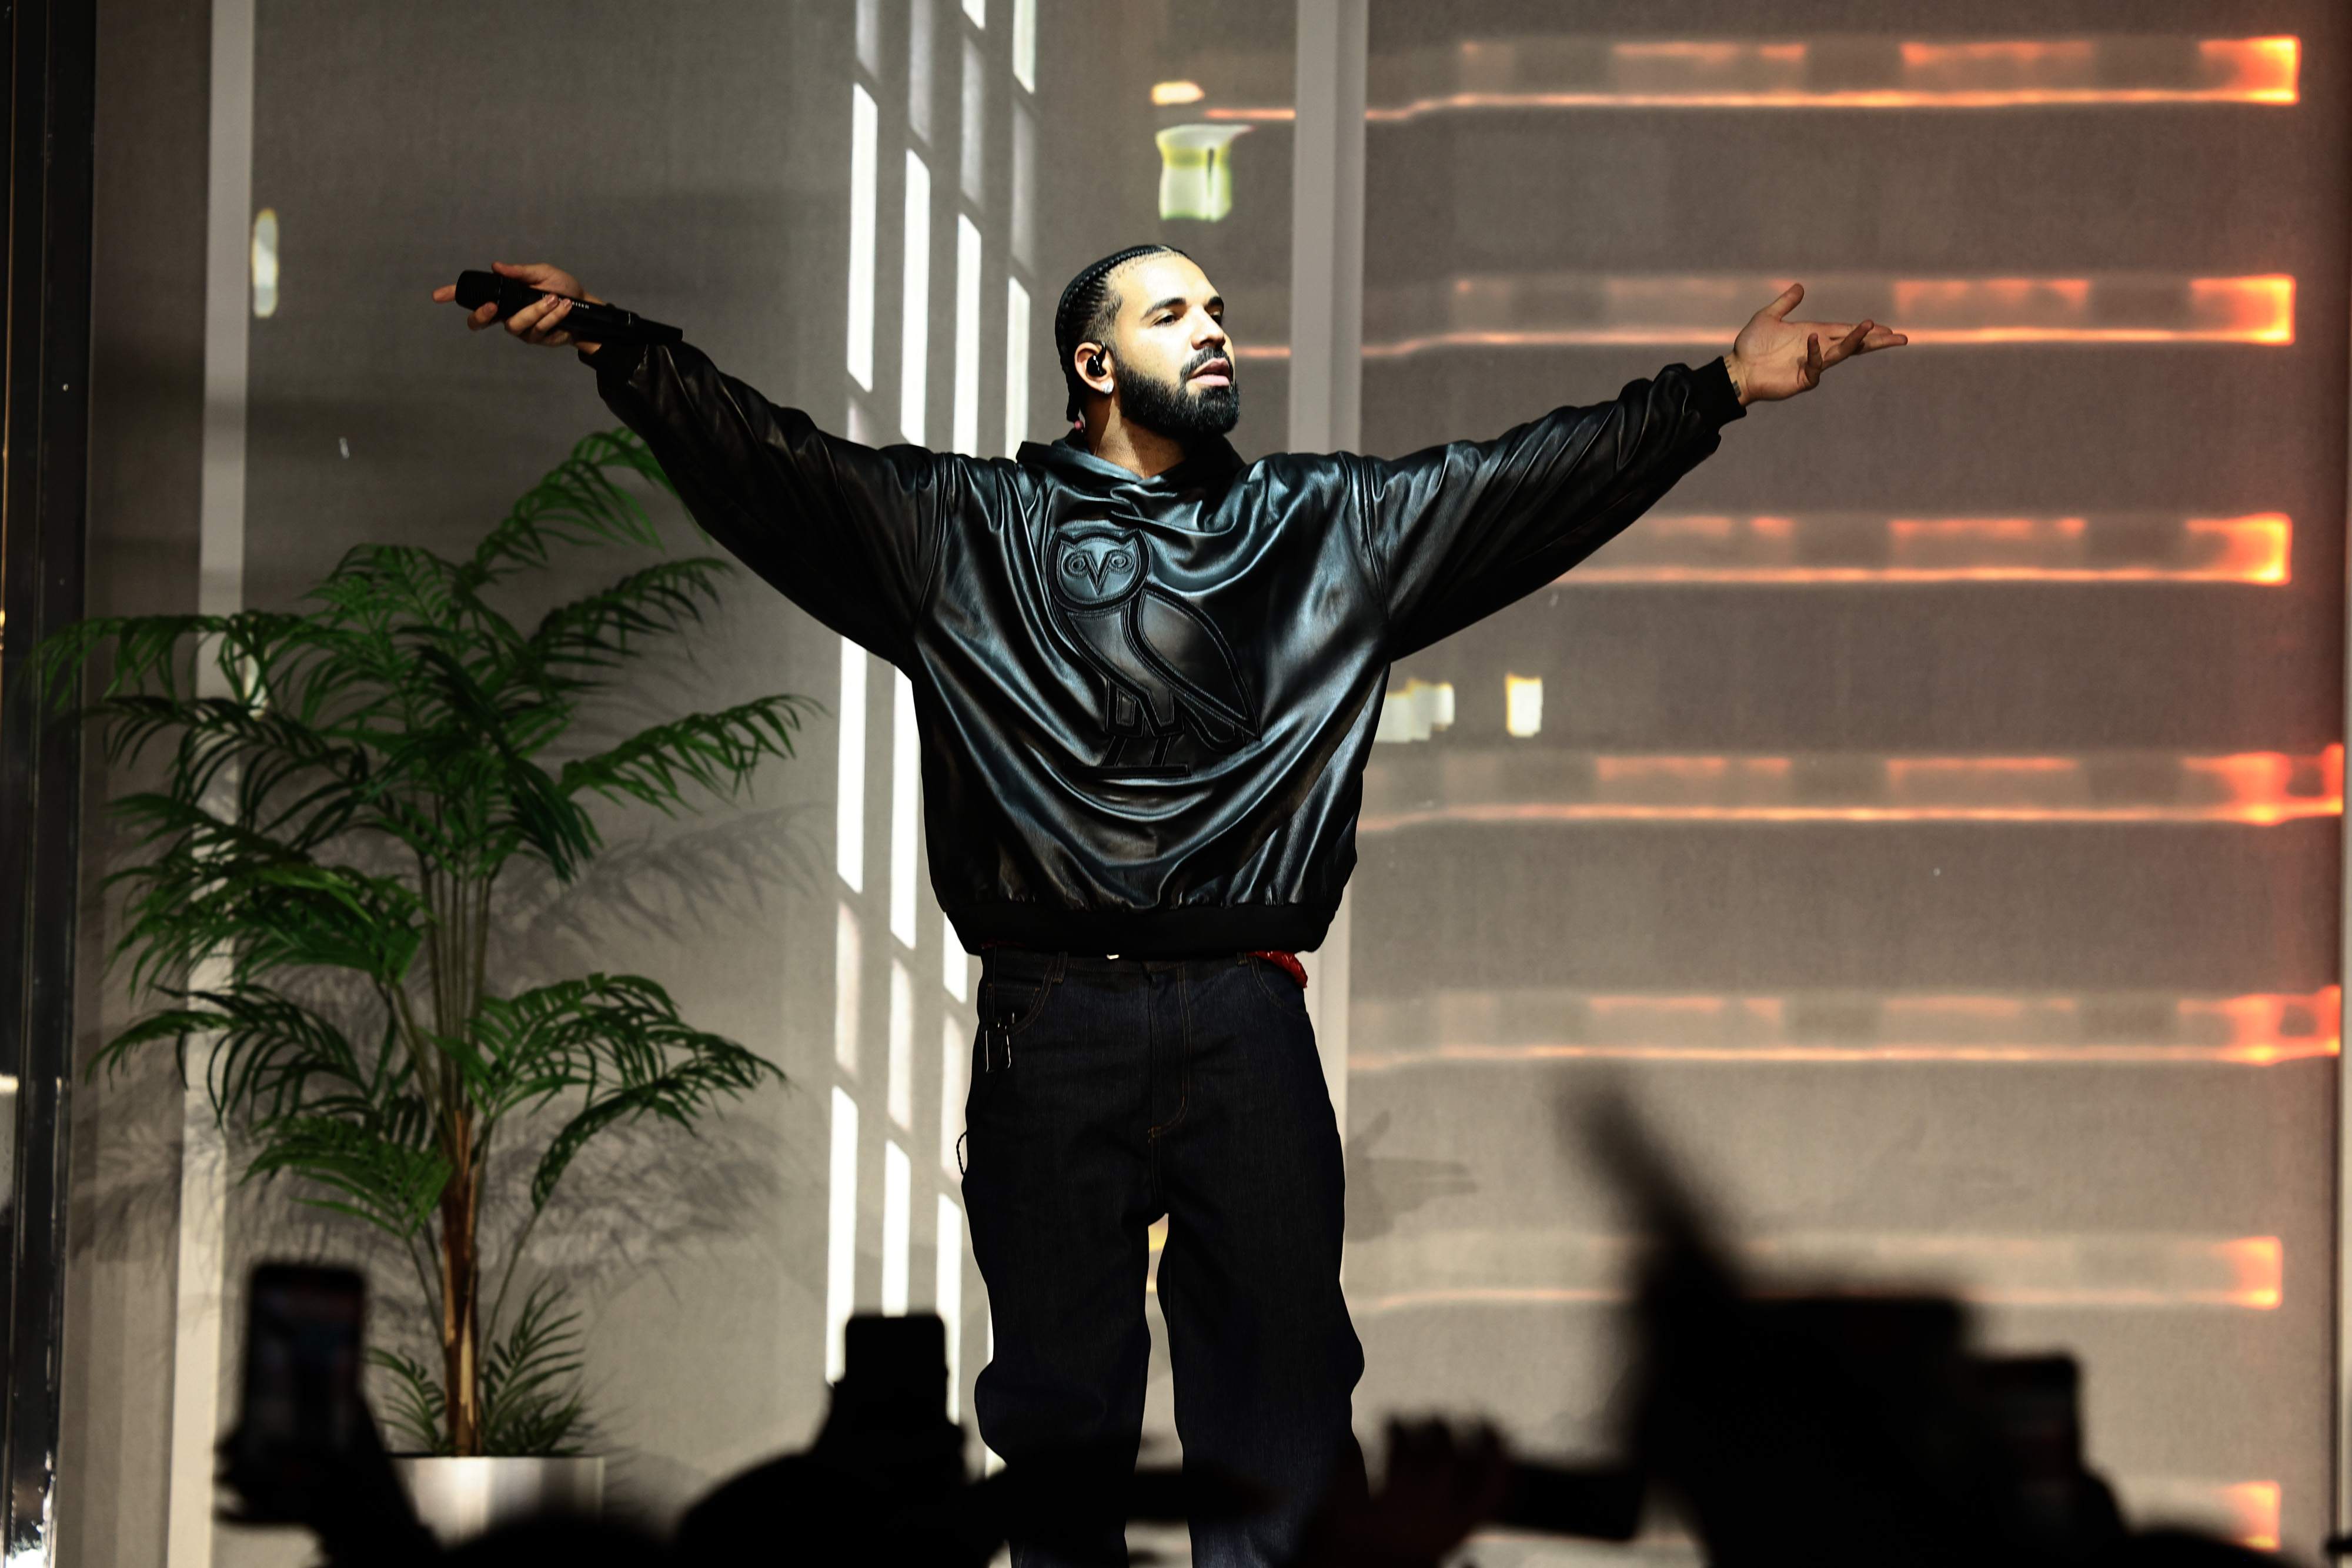 Some social media users believe Canadian rap star Drake may be involved with the rap beef